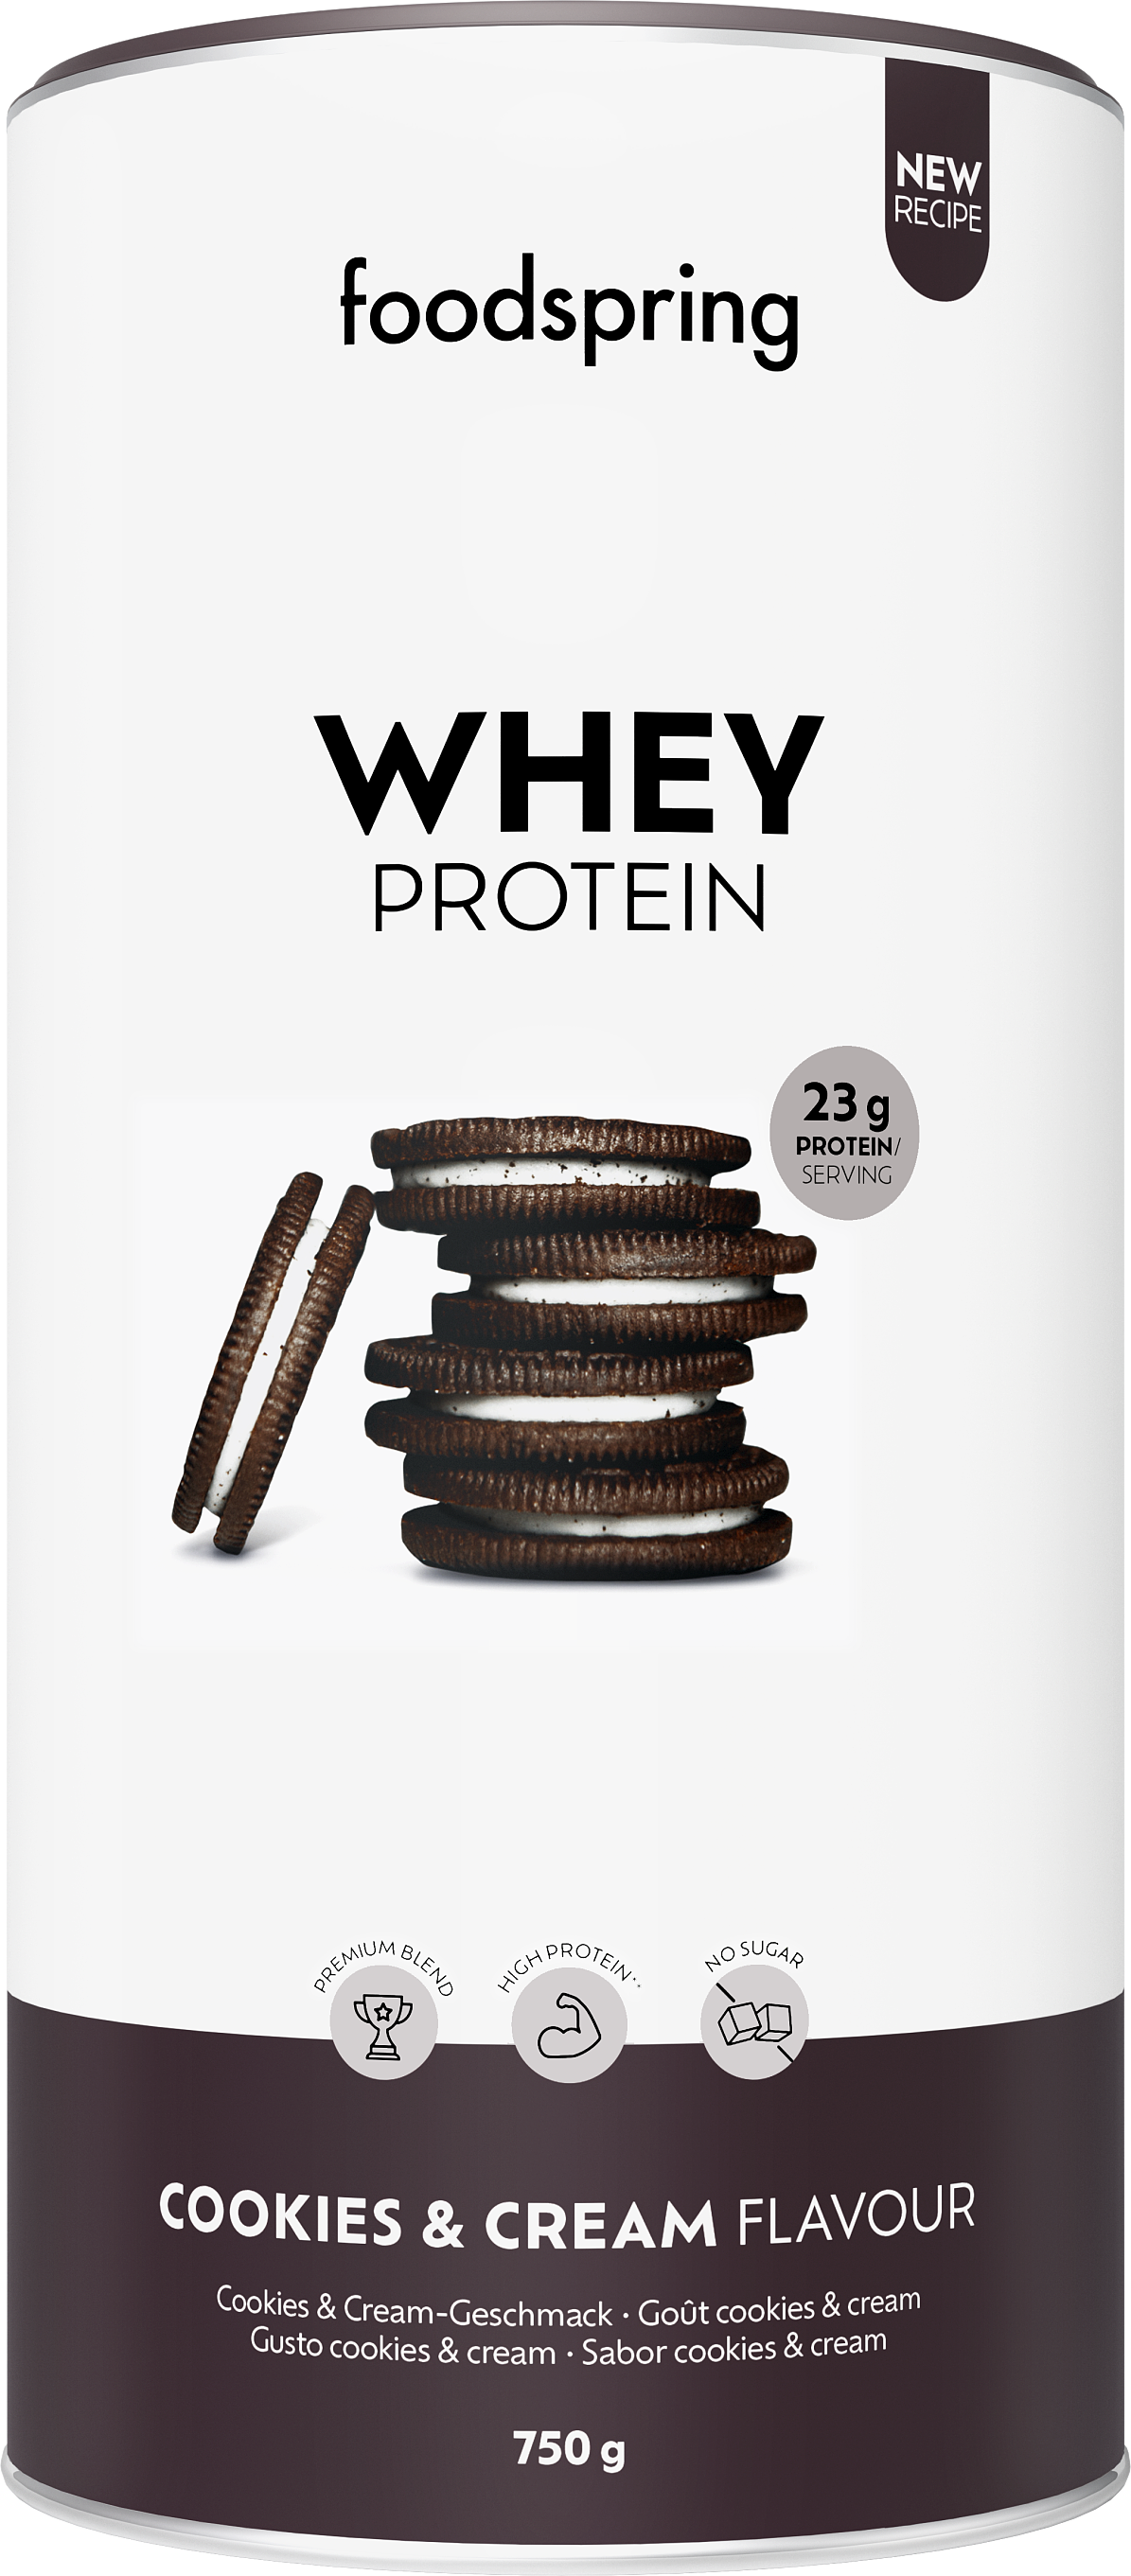 foodspring_Whey Protein_Cookies and Cream_EUR 32,99_01